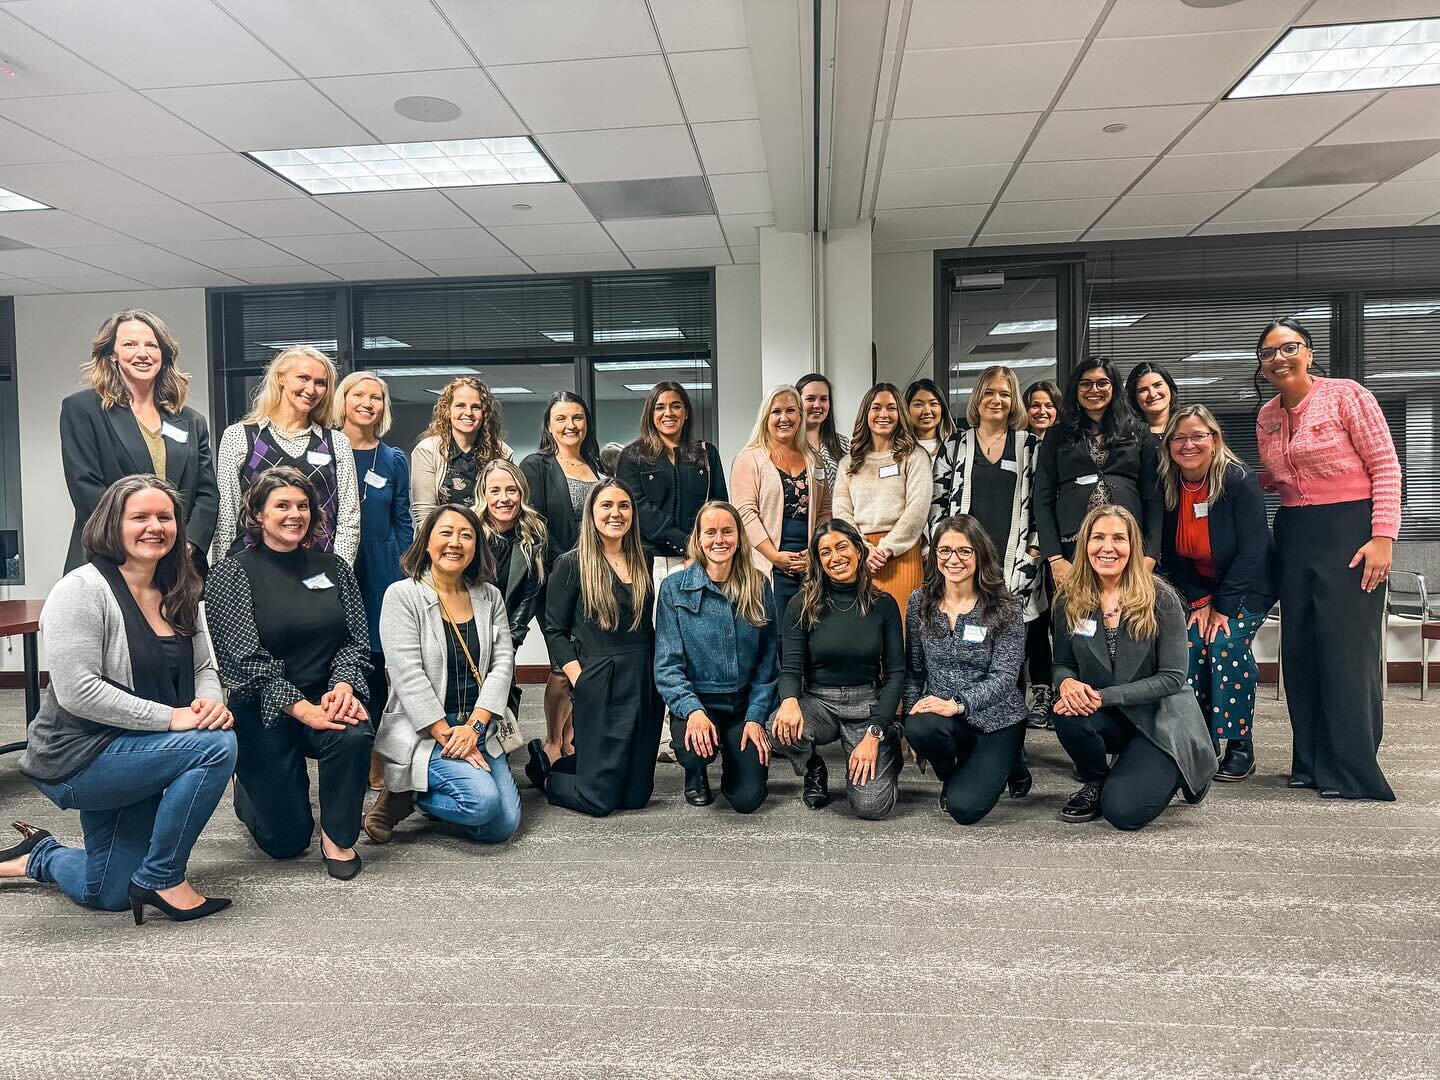 Kicked off our reception for our 2024 Ladder Down class! So glad to be able to be a co-director of this amazing program.
⠀
Excited for all the connections and business development these women will receive.